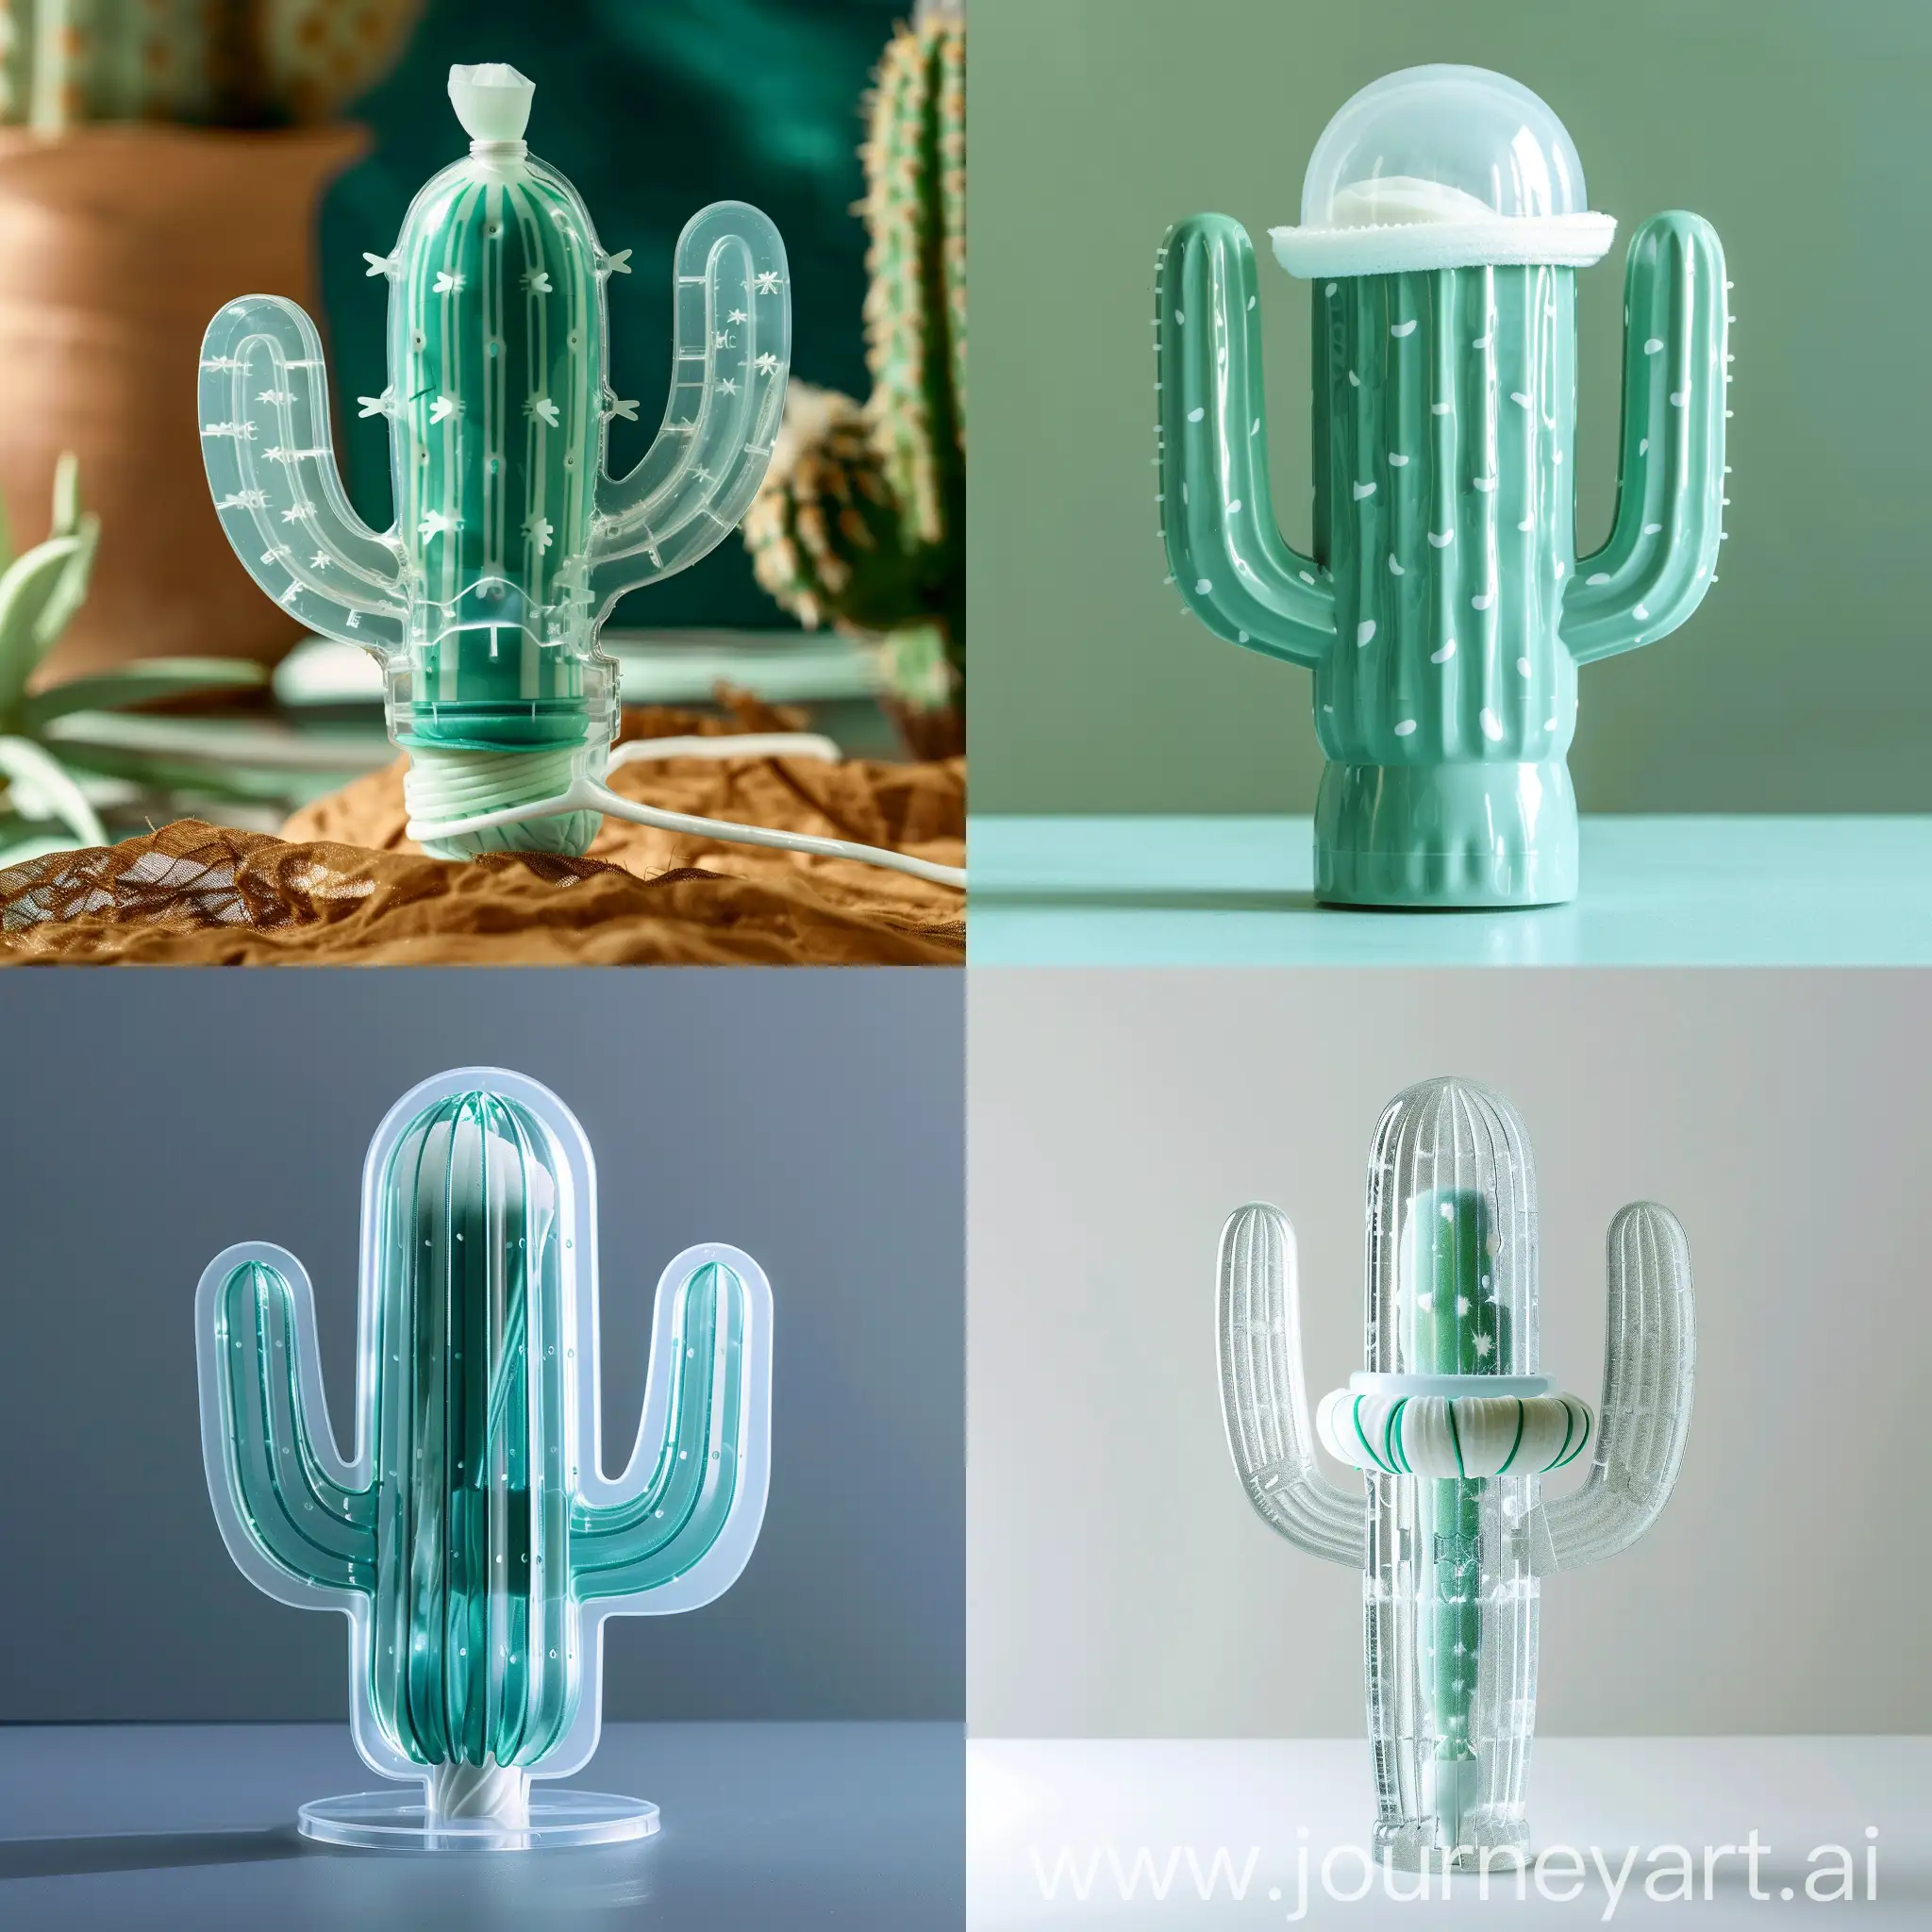 CactusShaped-Tampon-in-Plastic-Cover